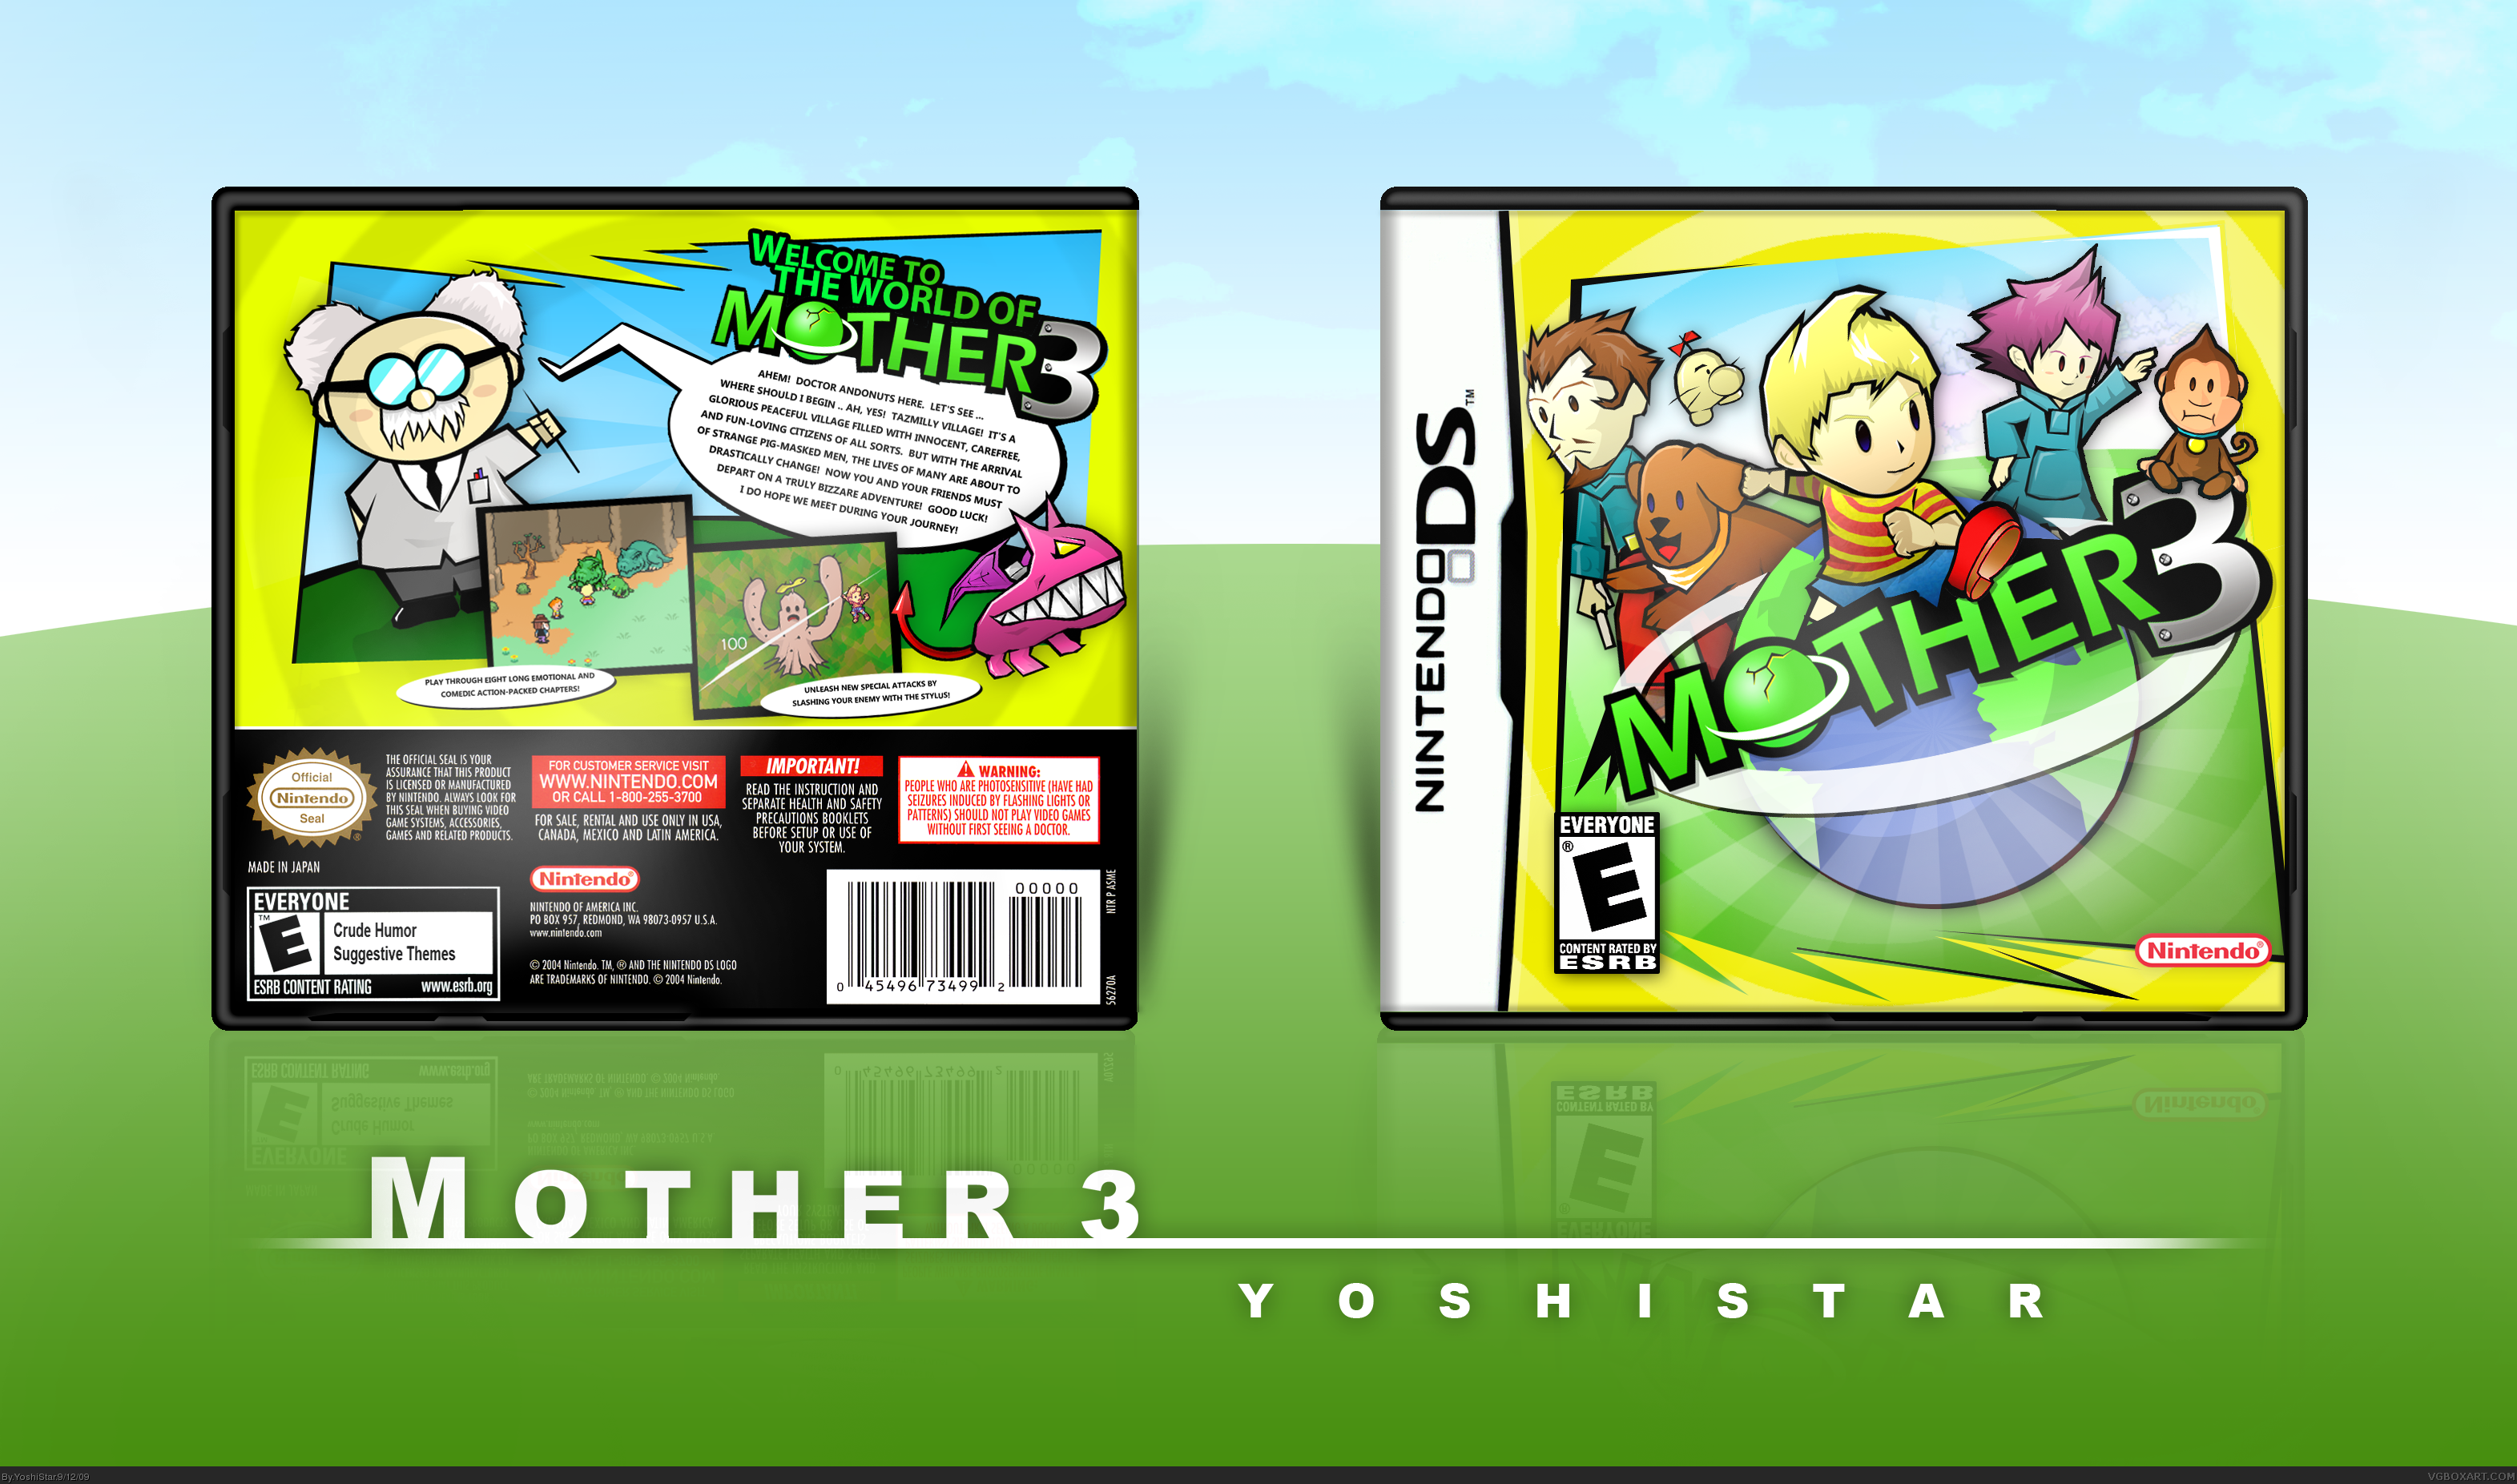 Mother 3 box cover